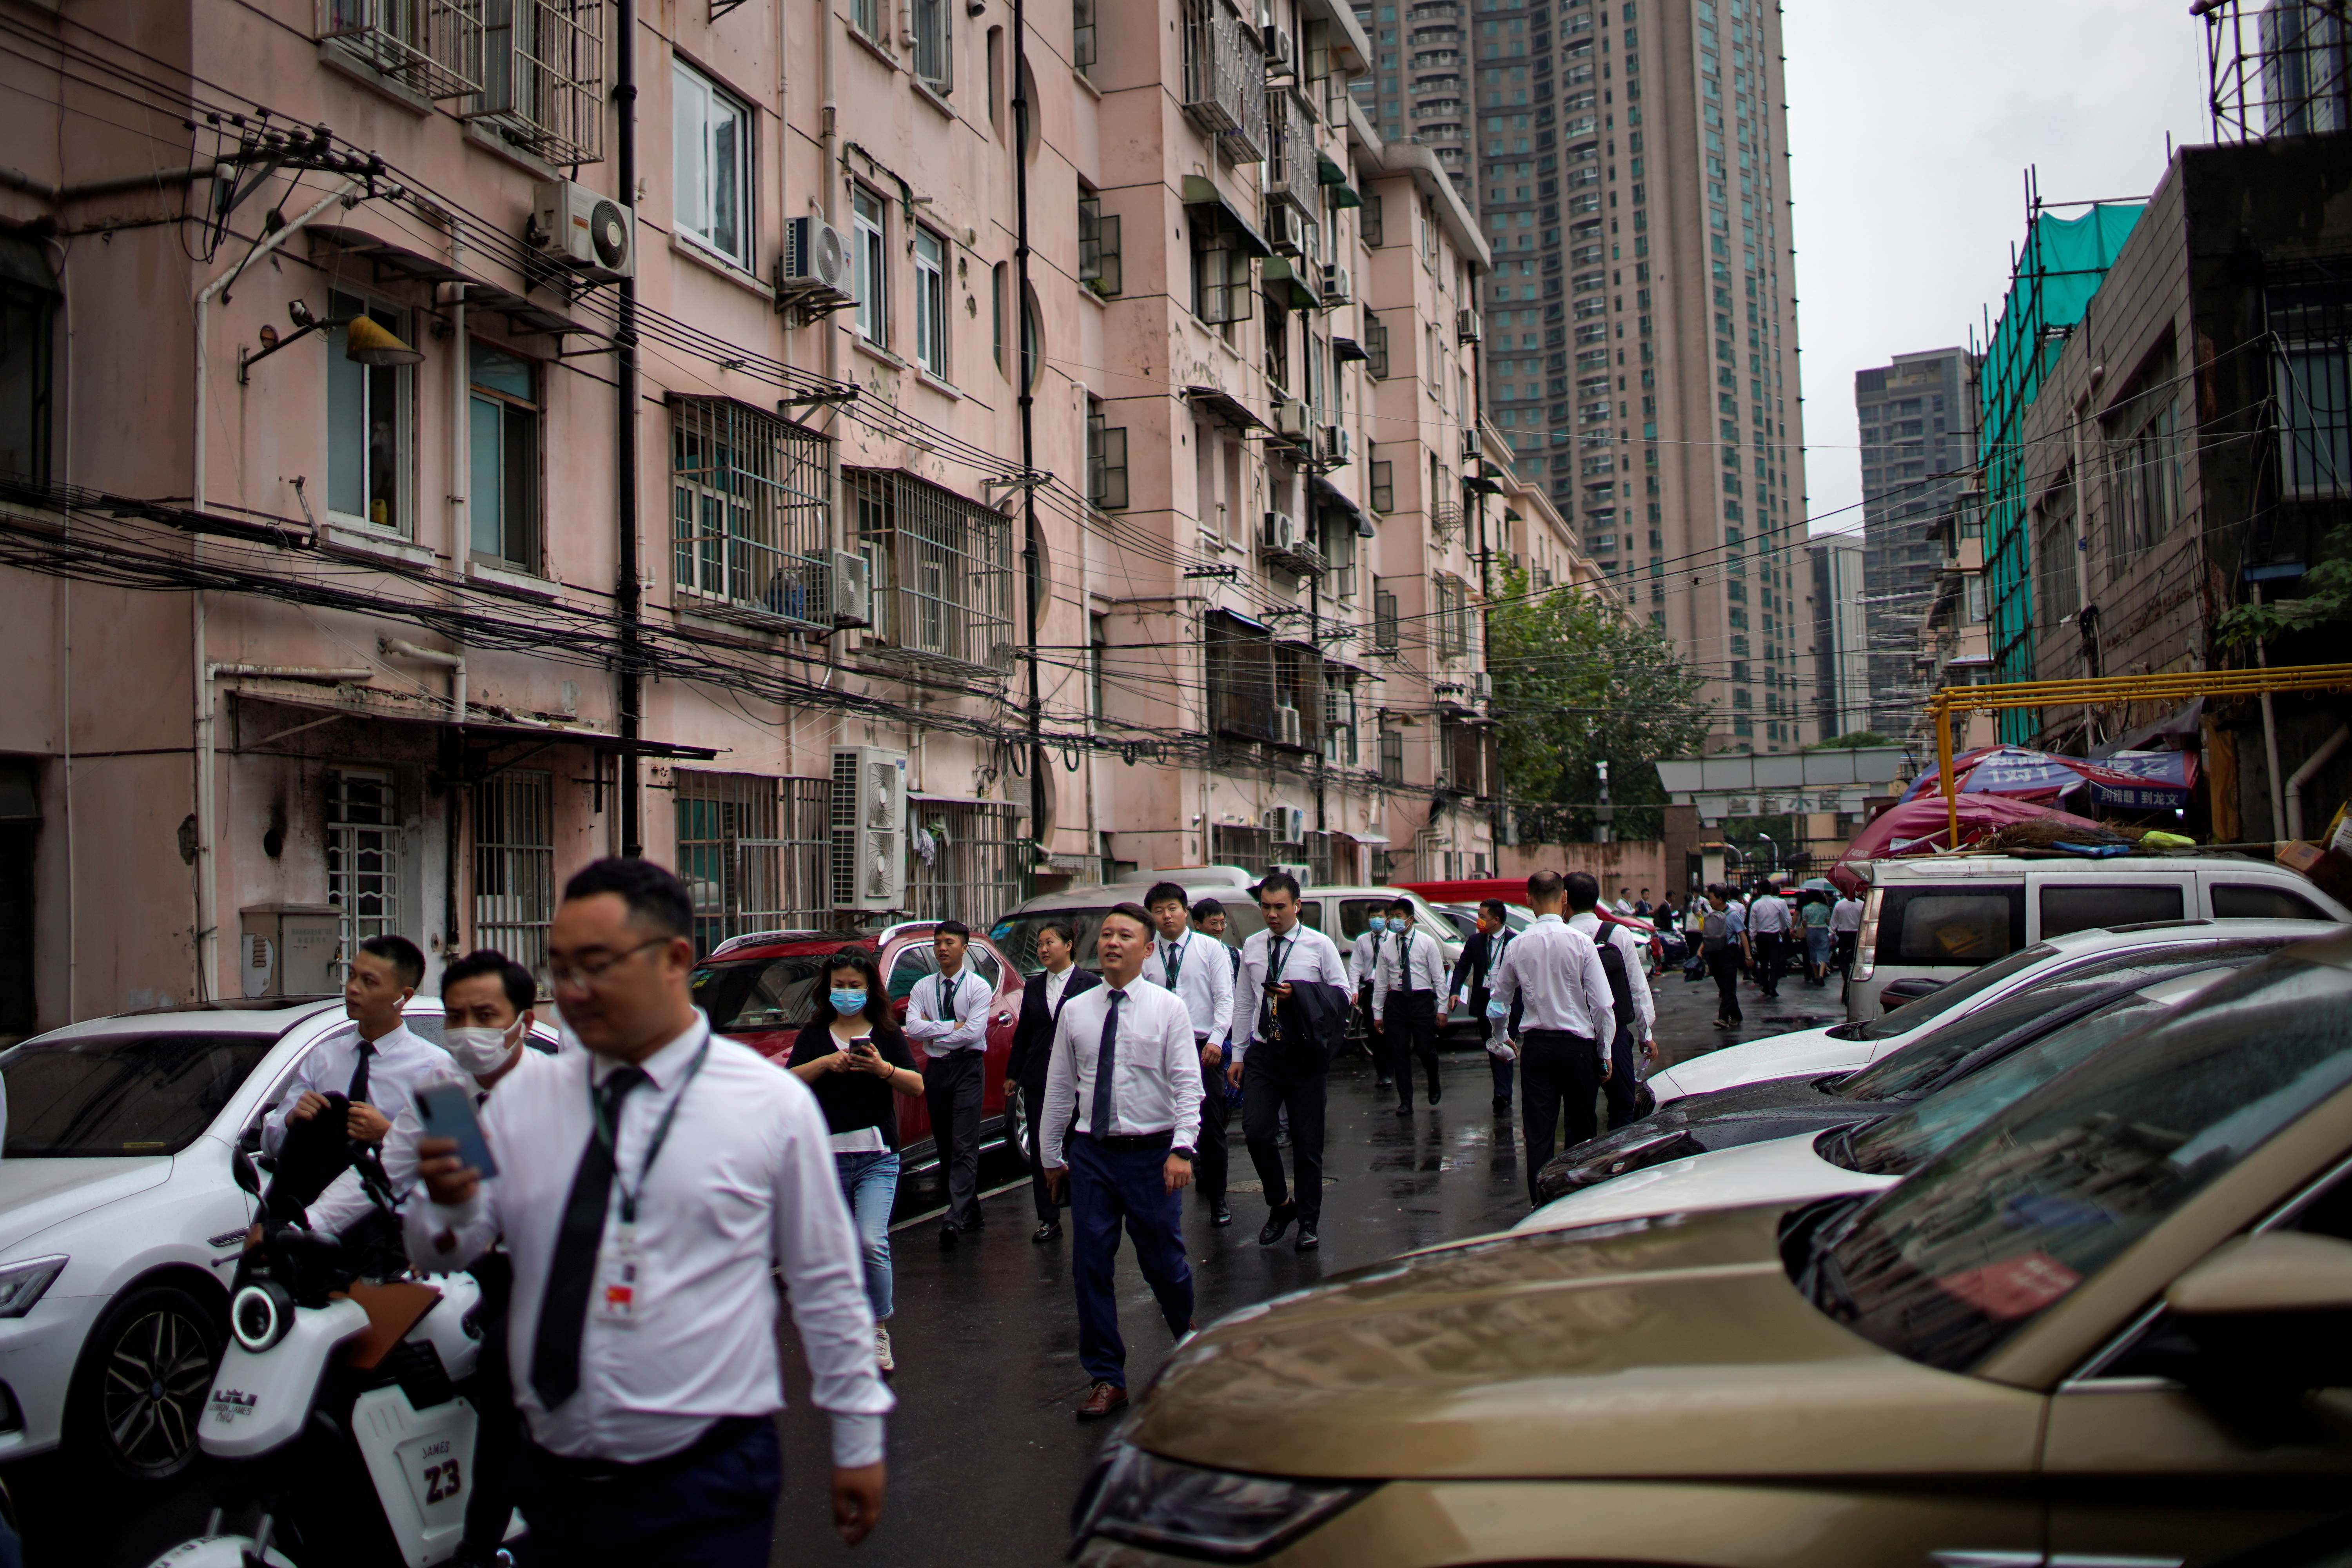 Real estate agents walk along at a residential area in Shanghai, China October 15, 2021. REUTERS/Aly Song